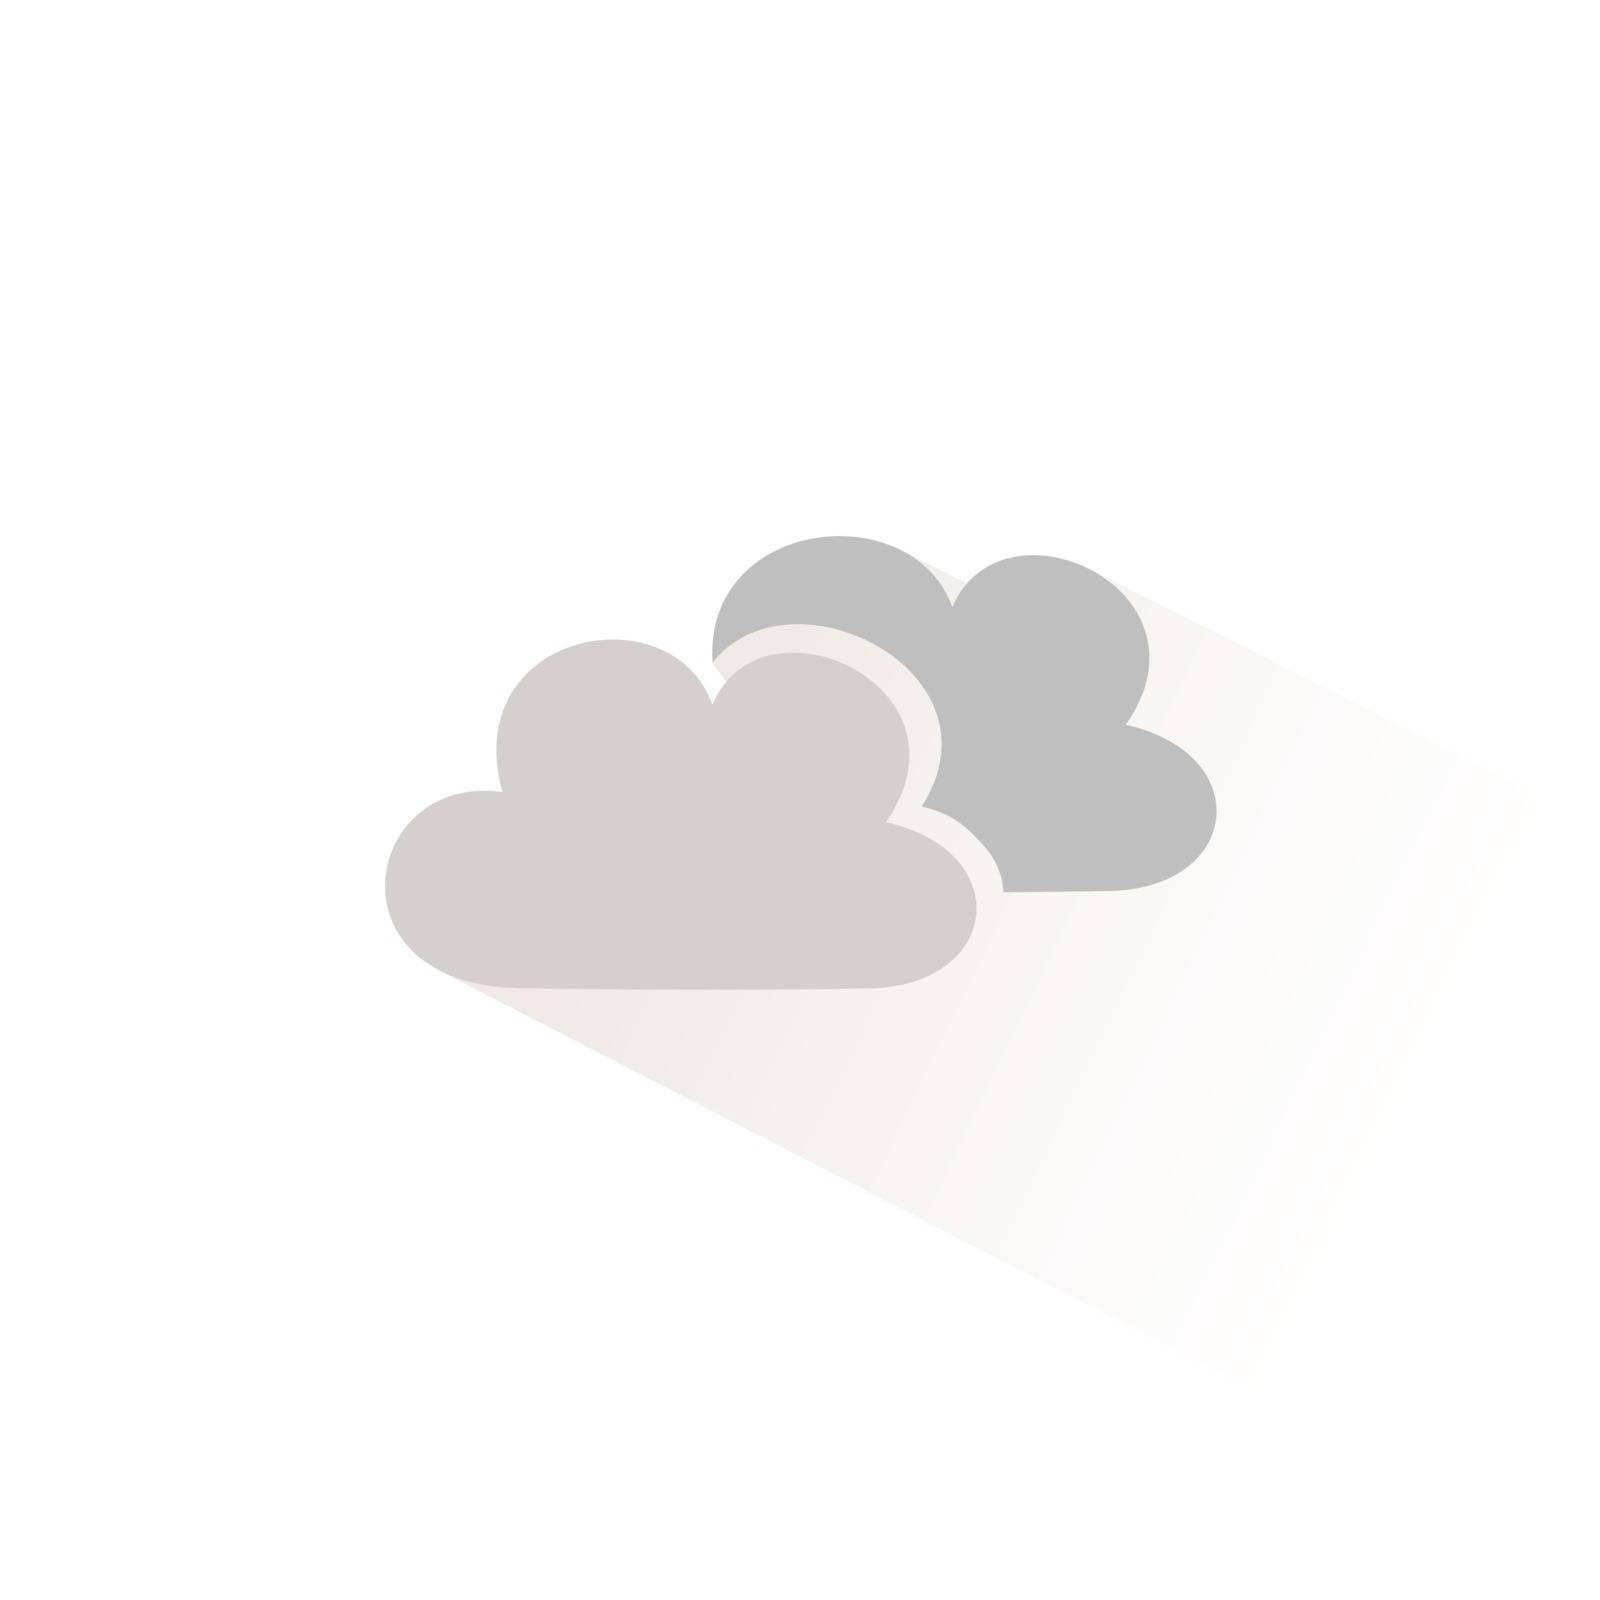 Clouds color icon with shadow. Flat vector illustration